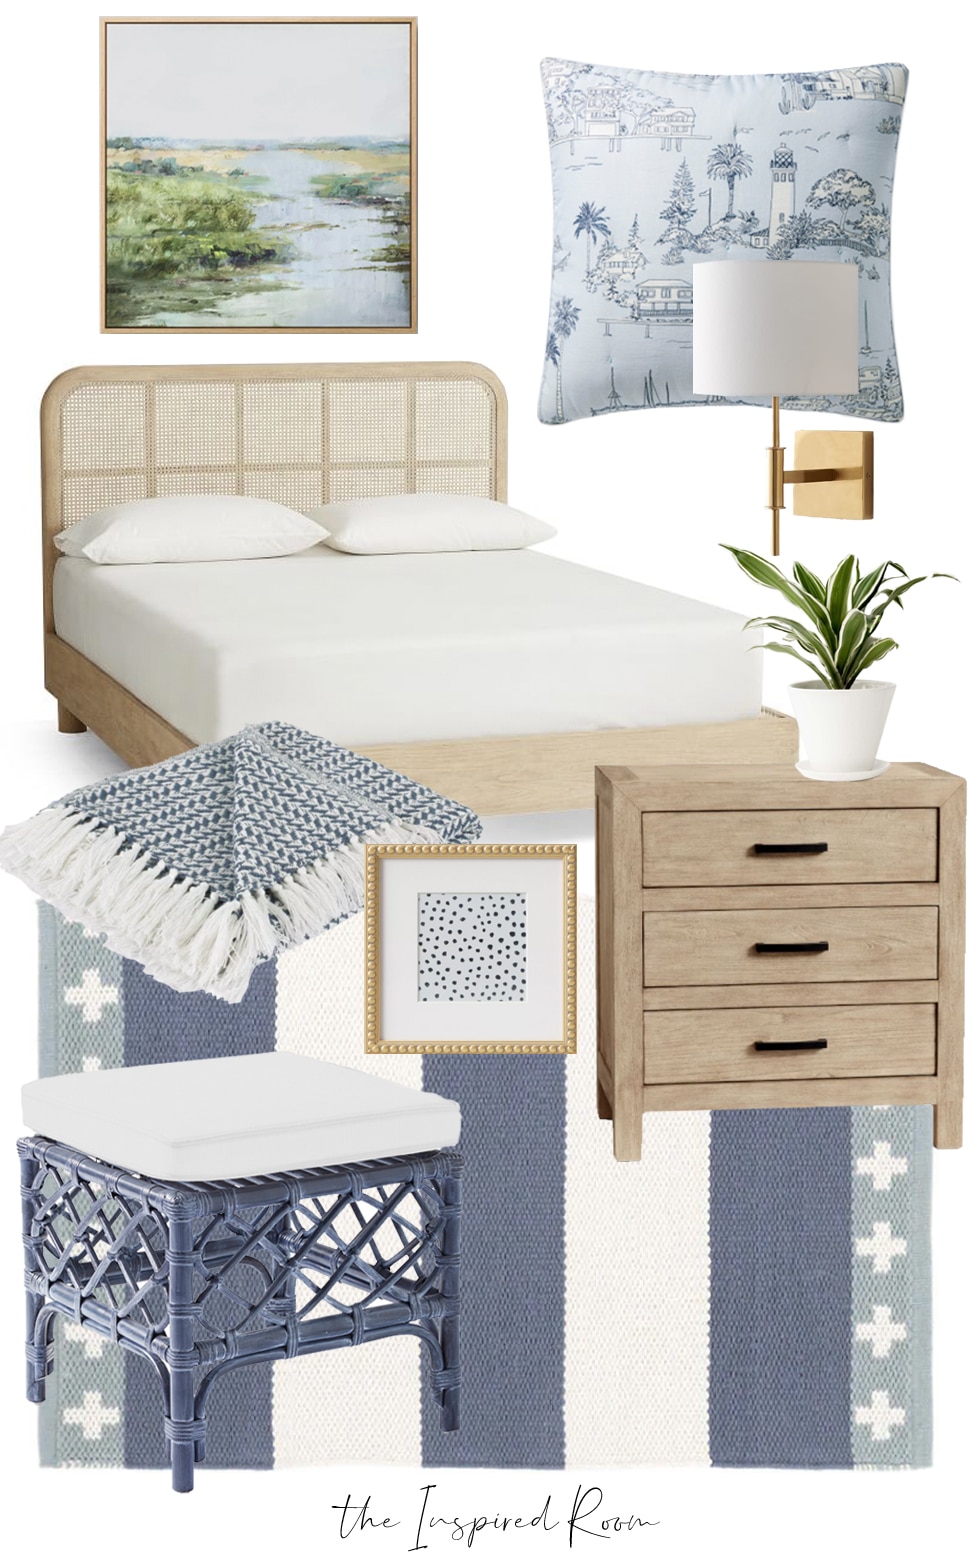 Bedroom Decorating Ideas + Mood Boards: One Cane Bed, 3 Ways